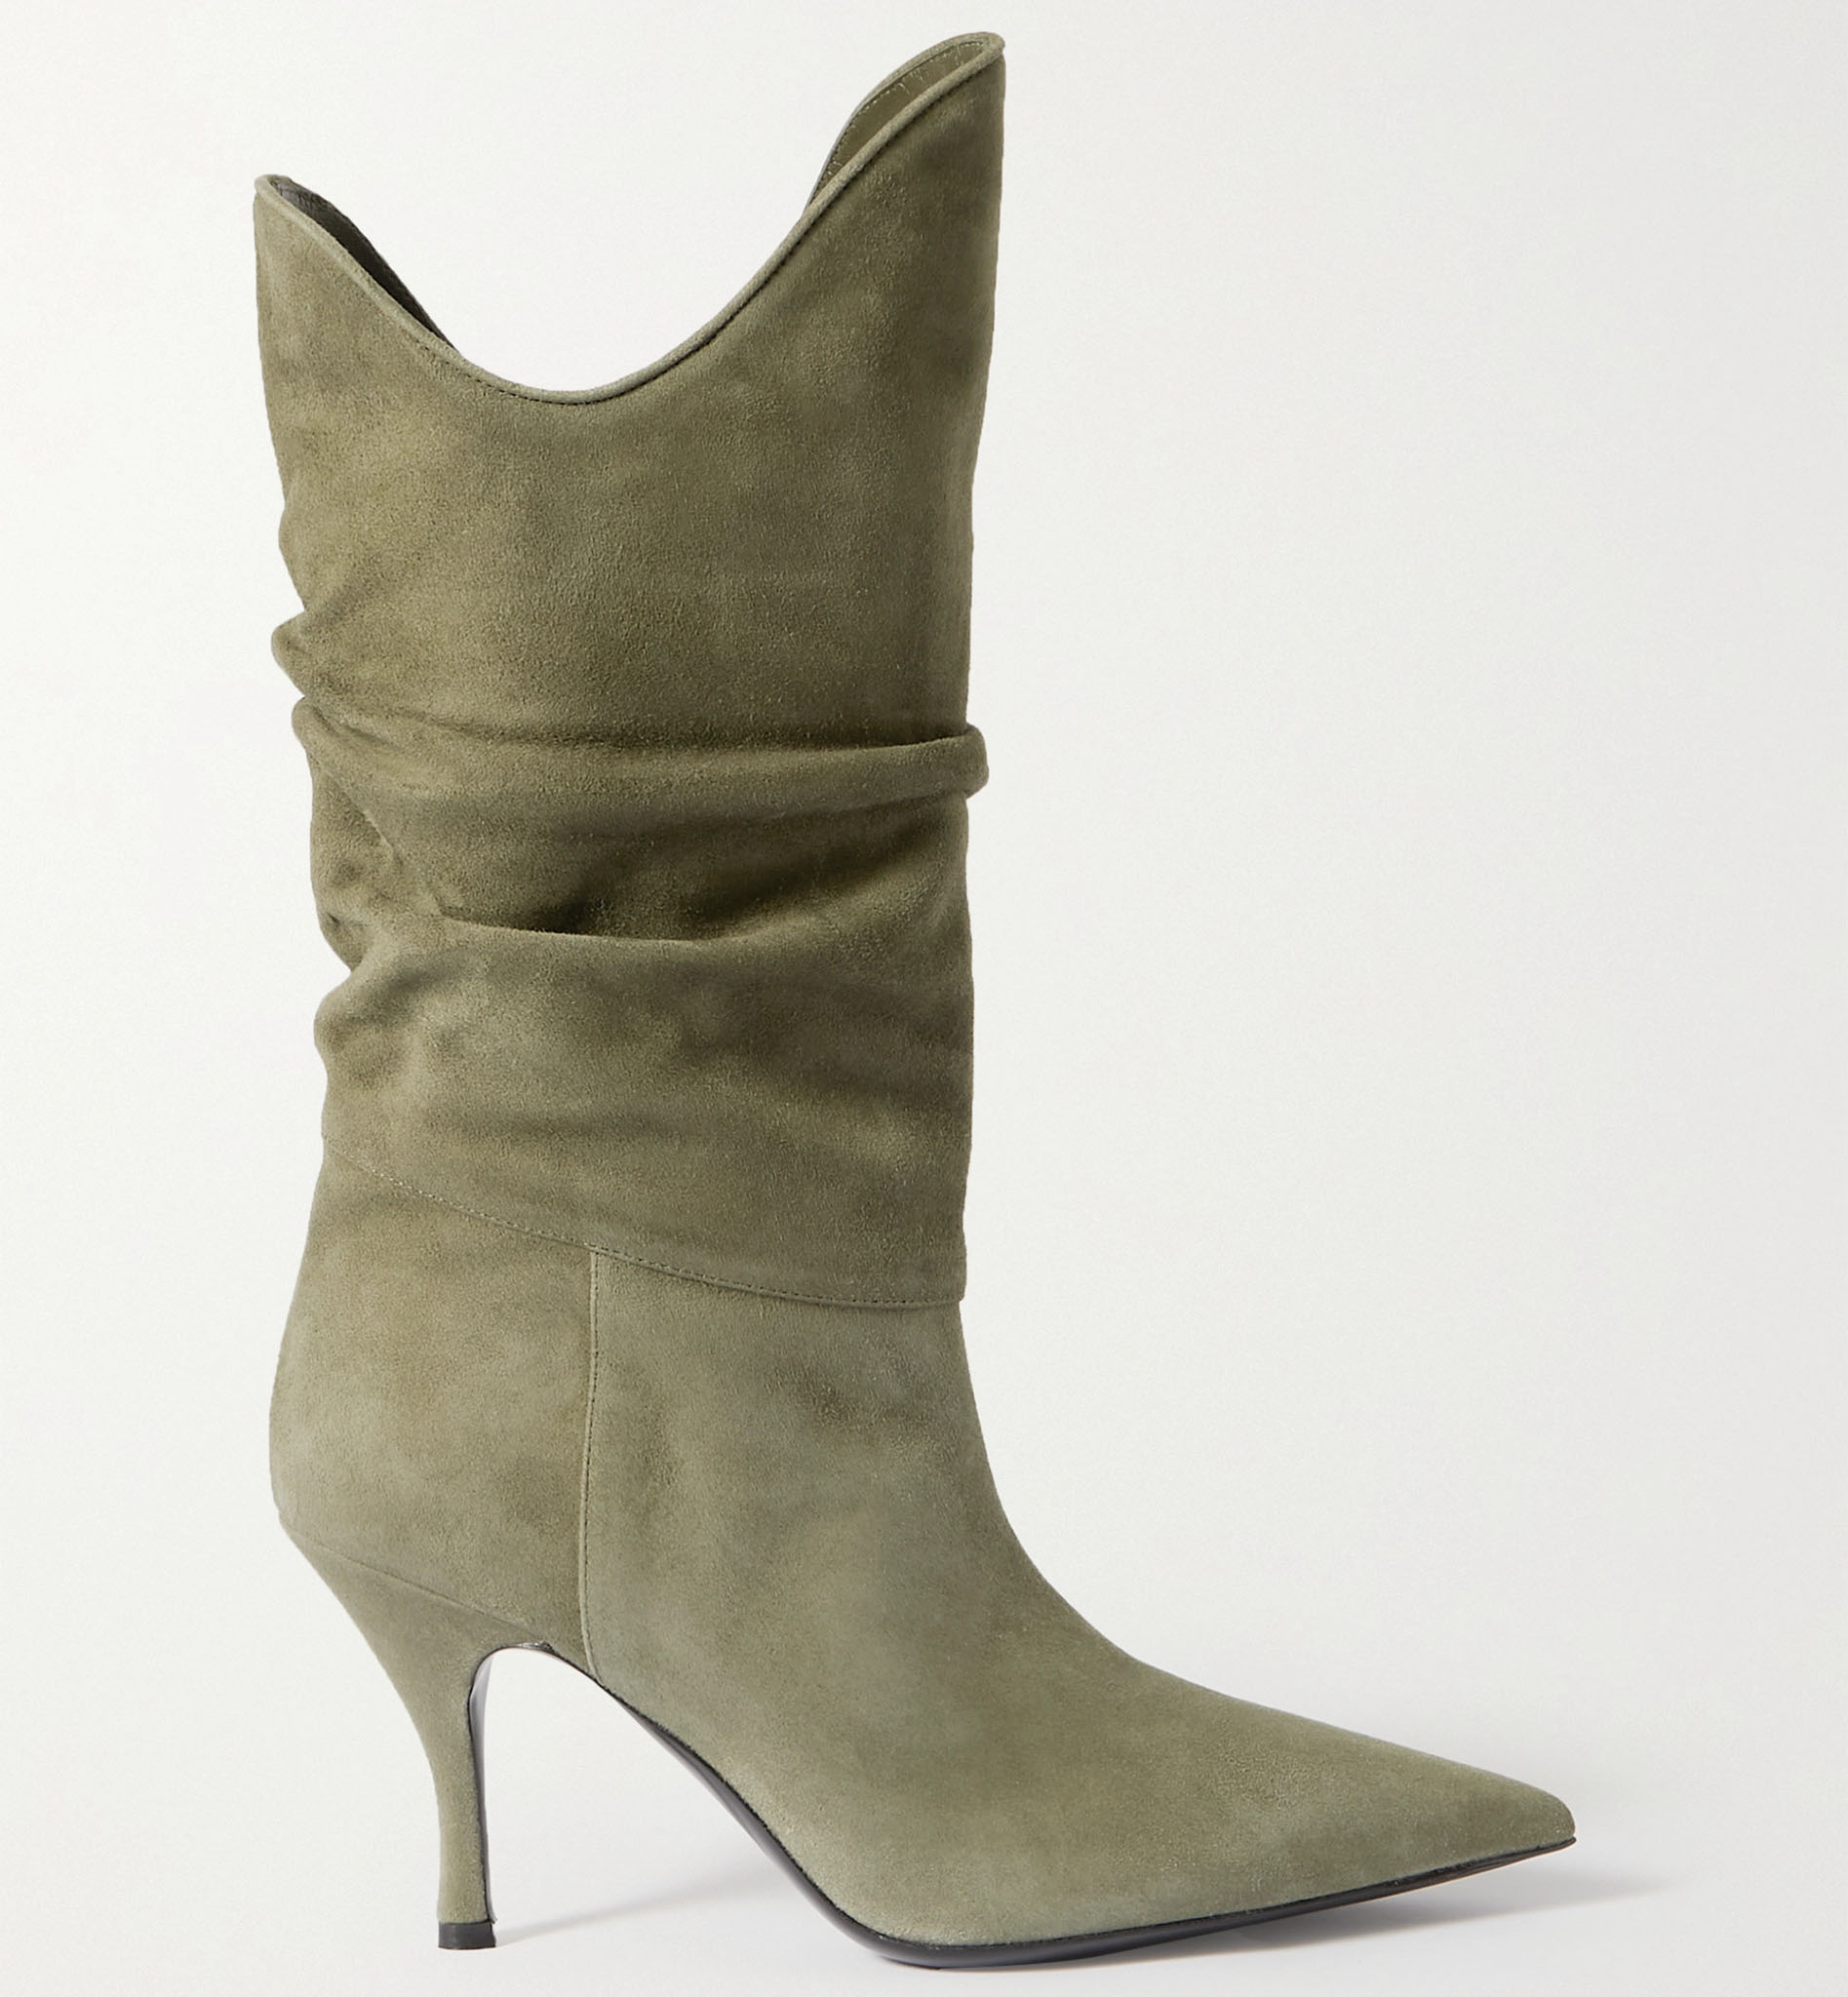 Made in Italy from soft army-green suede, the slouched The Attico's 'Venus' boots have pointy toes and stiletto heels